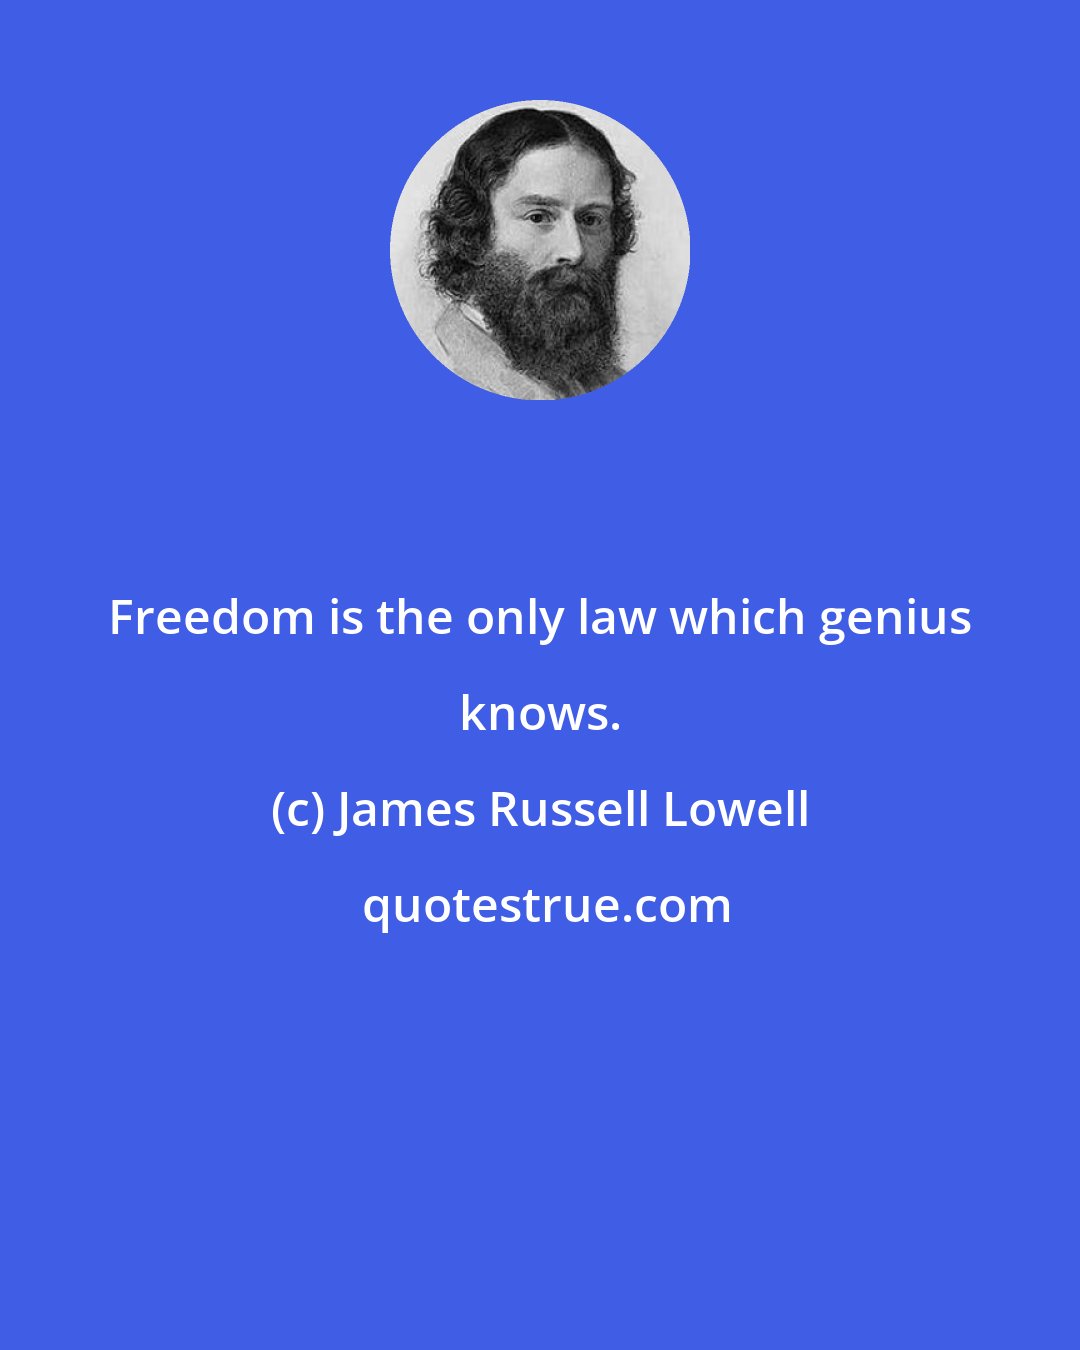 James Russell Lowell: Freedom is the only law which genius knows.